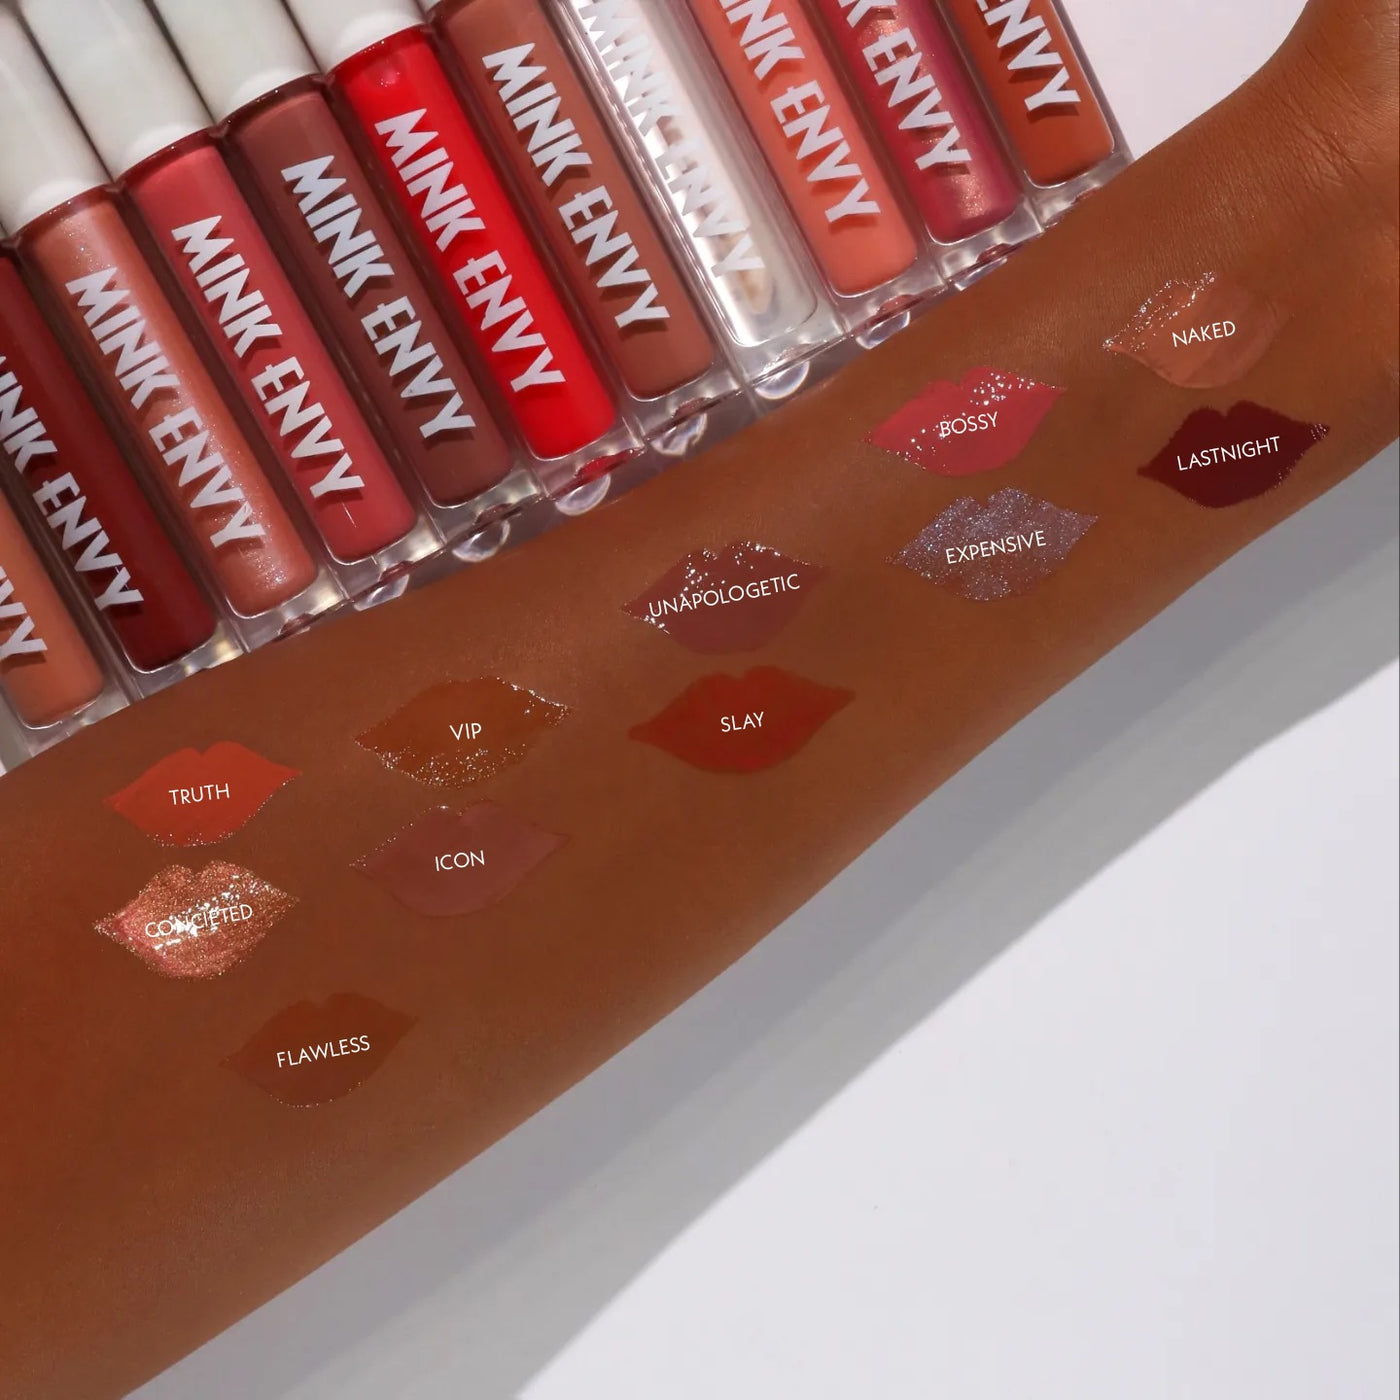 Unapologetic Lip Gloss Lacquer - Mink Envy Lashes